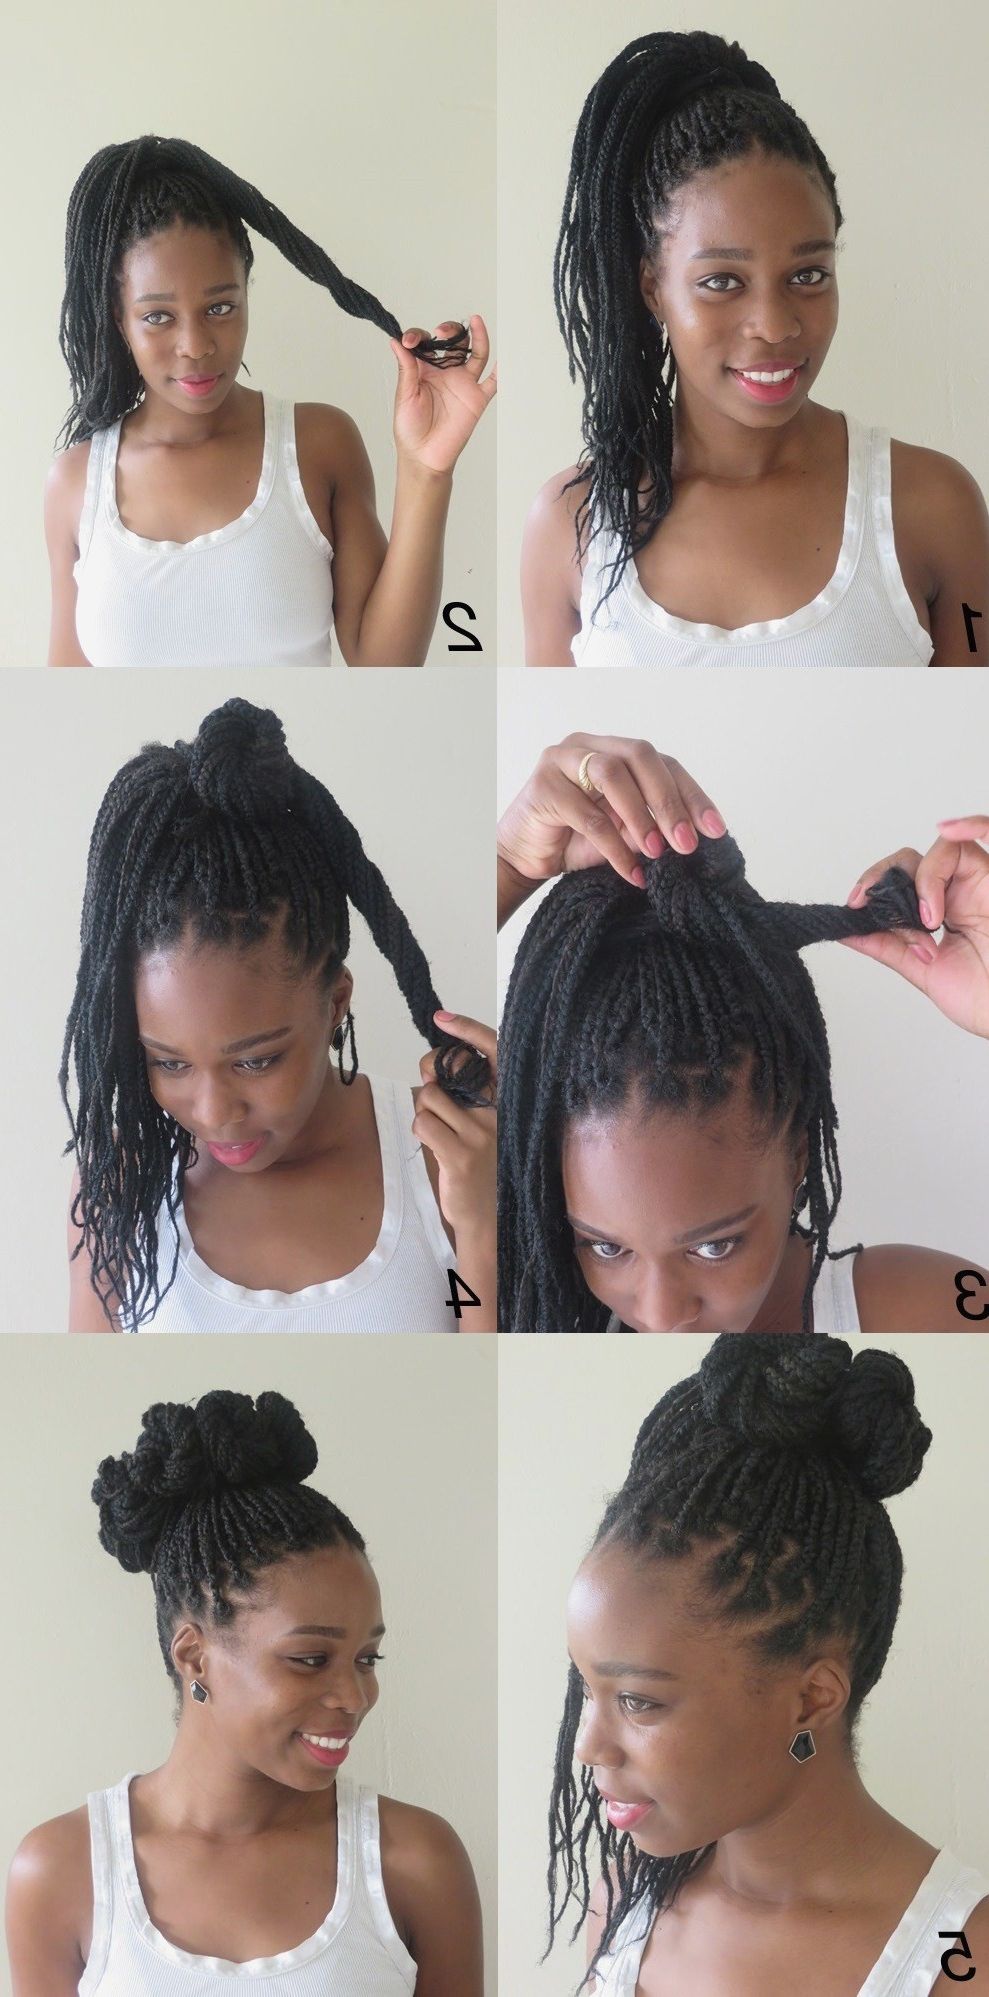 Black Hairstyles : Creative Black Tie Updo Hairstyles Pictures Under With Regard To Updo Hairstyles For Black Tie Event (View 12 of 15)